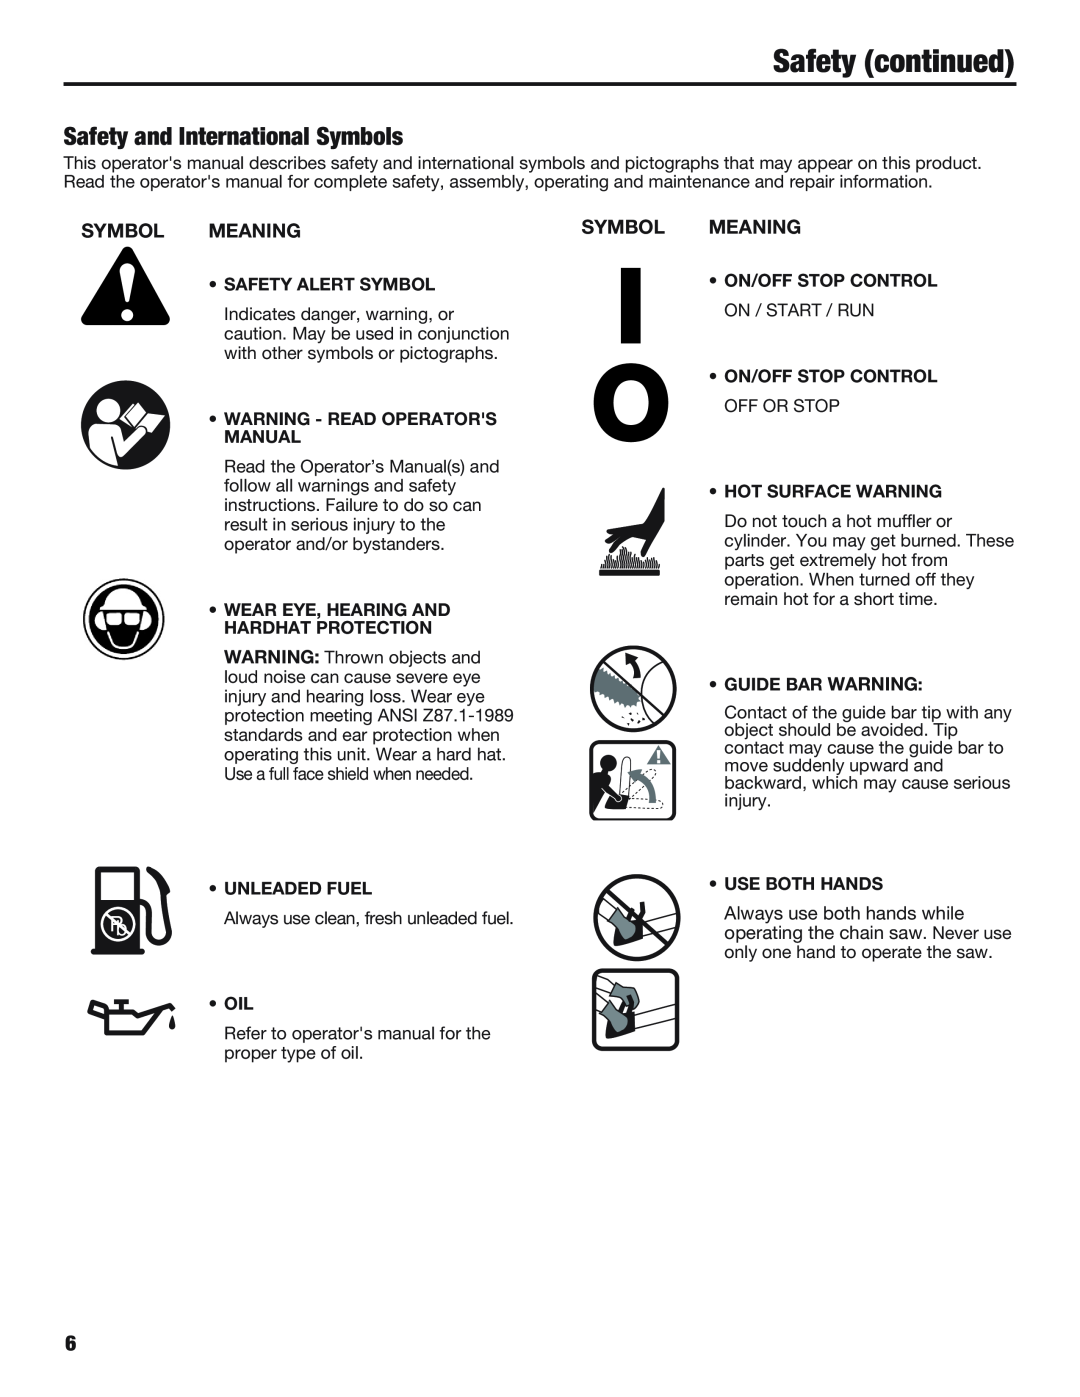 Cub Cadet CS5018 Safety and International Symbols, Meaning, Safety continued, Safety Alert Symbol, Unleaded Fuel, Oil 